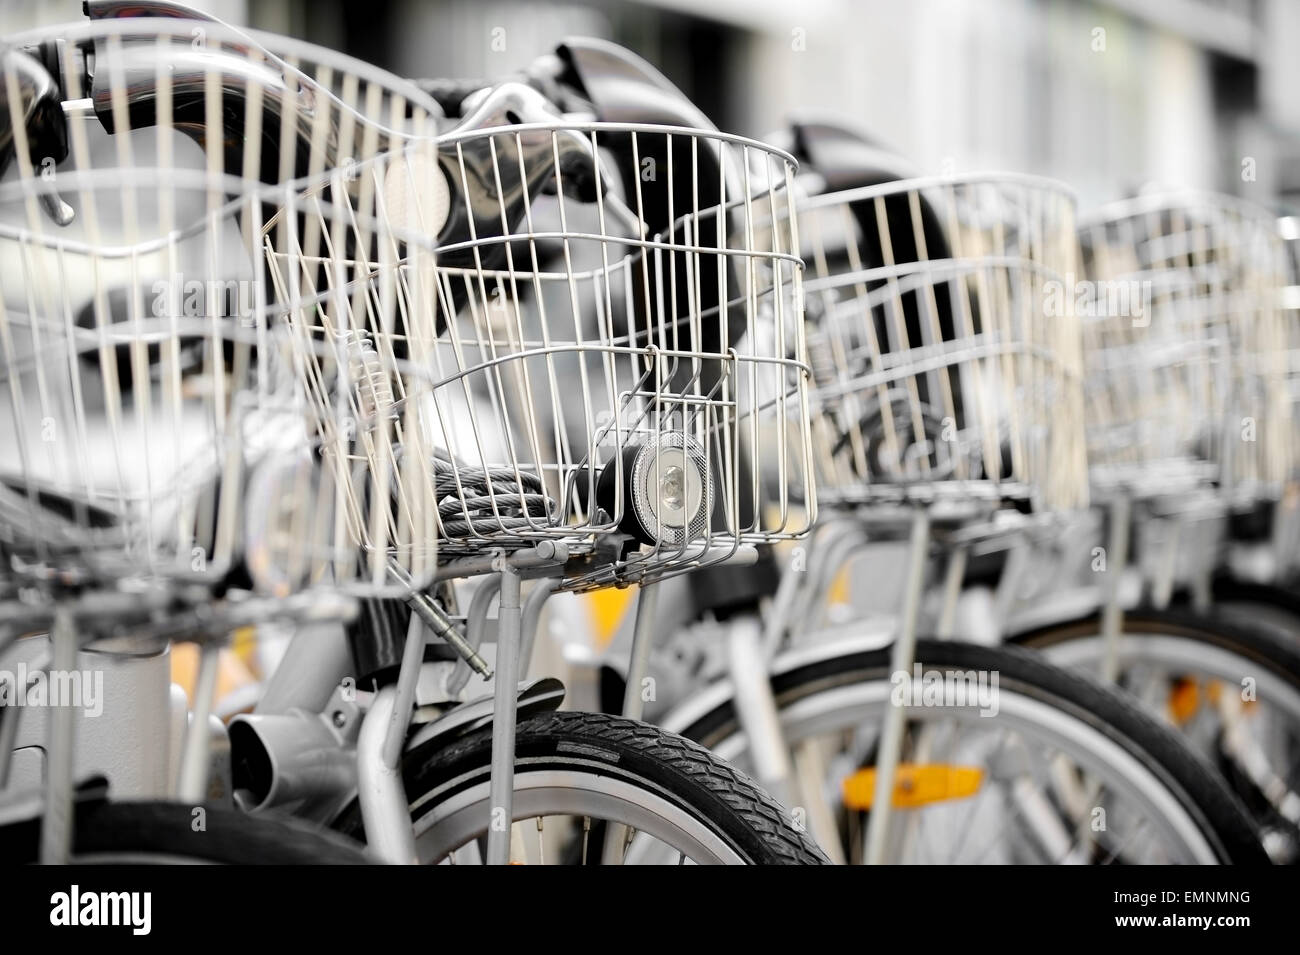 City bicycles with front basket are seen in a rental station Stock Photo